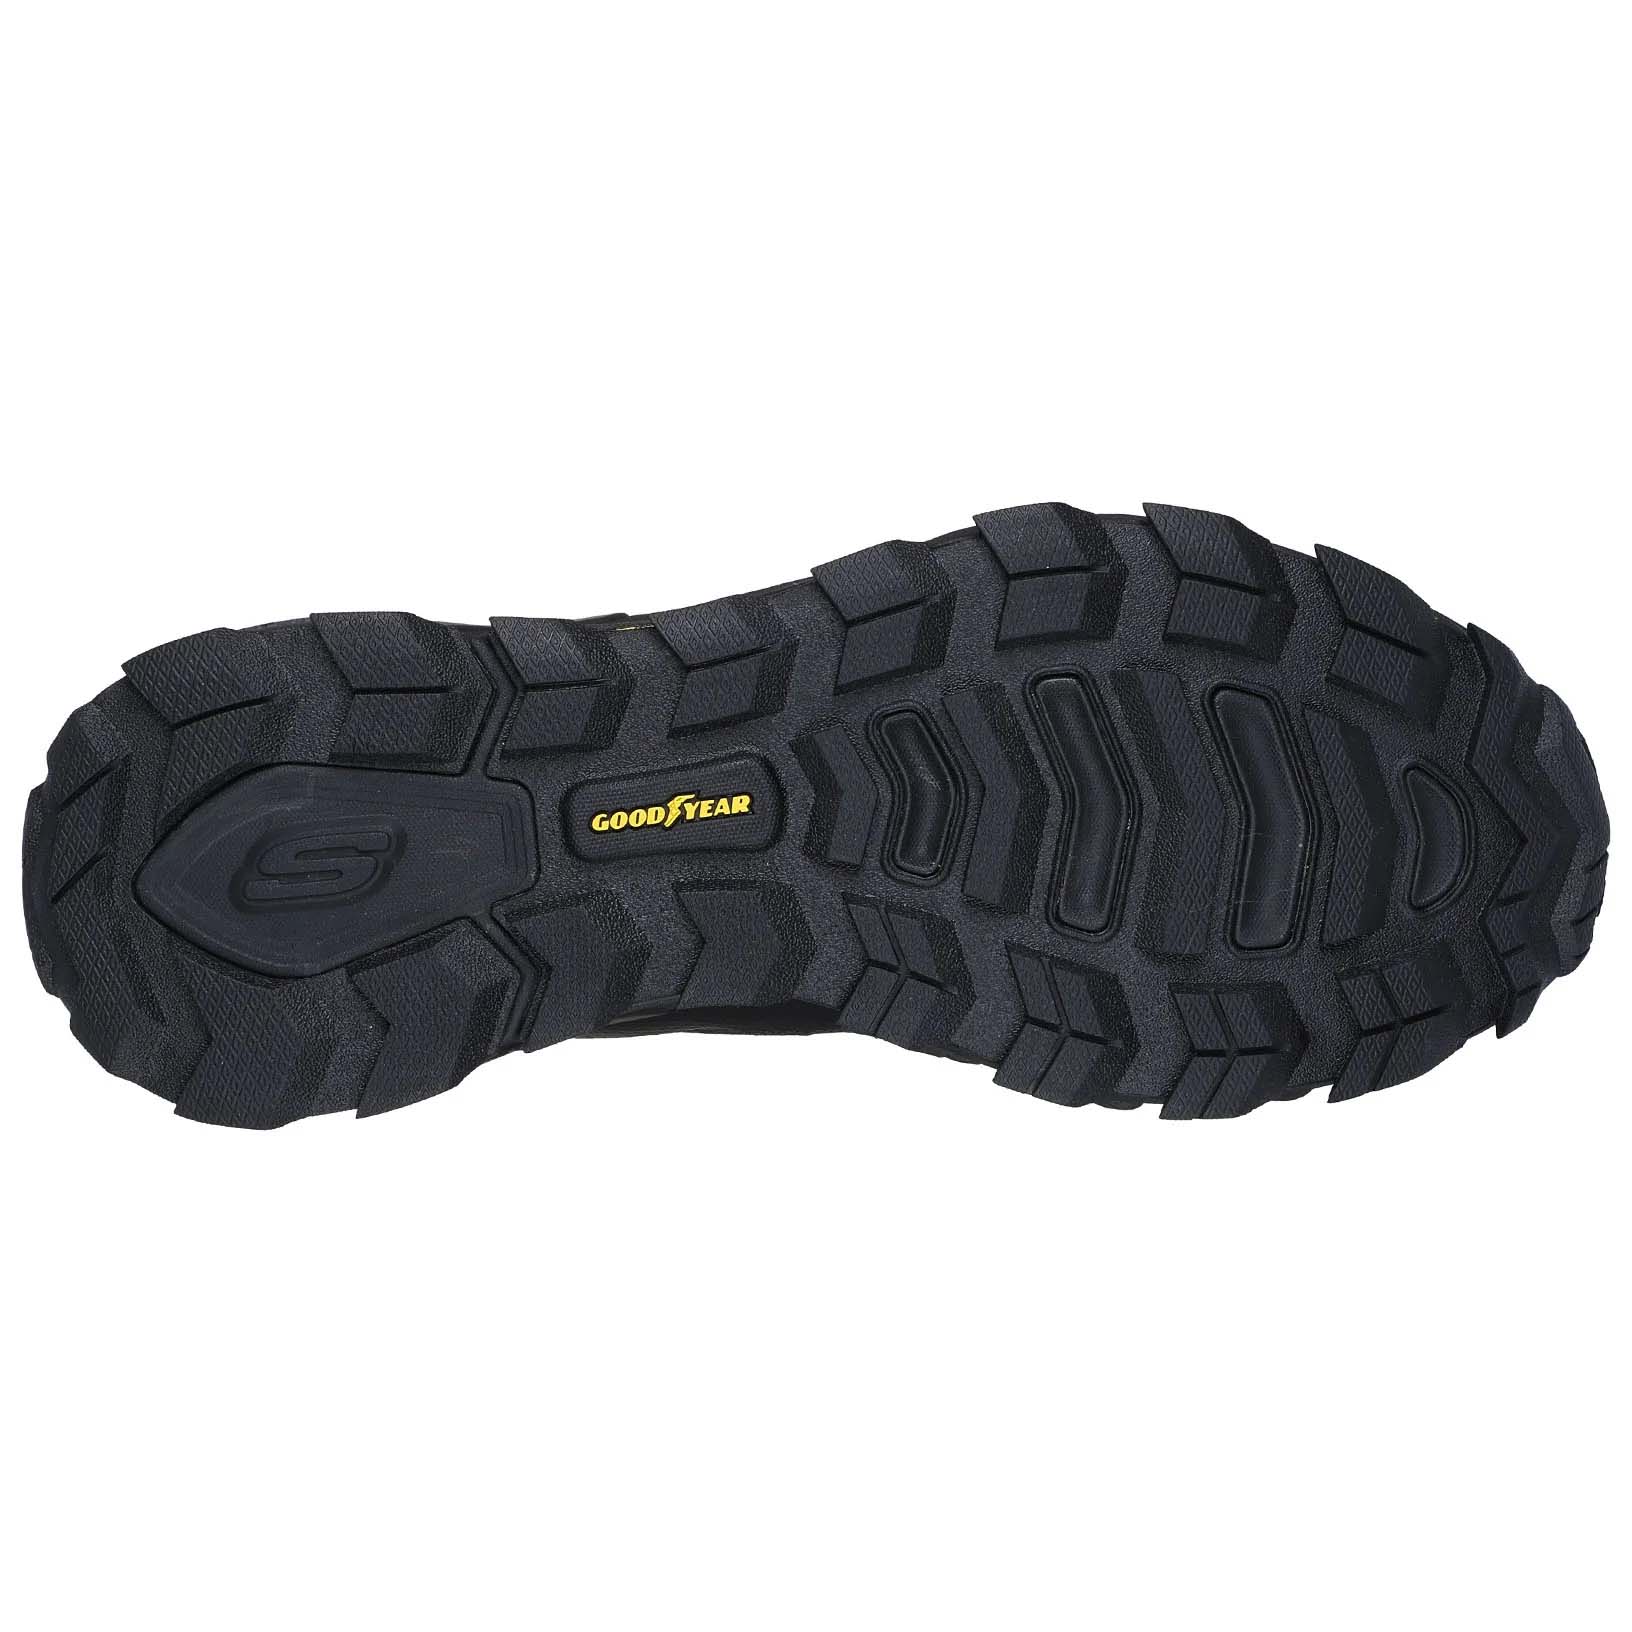 Skechers Max Protect Slip Ins Walking Shoes